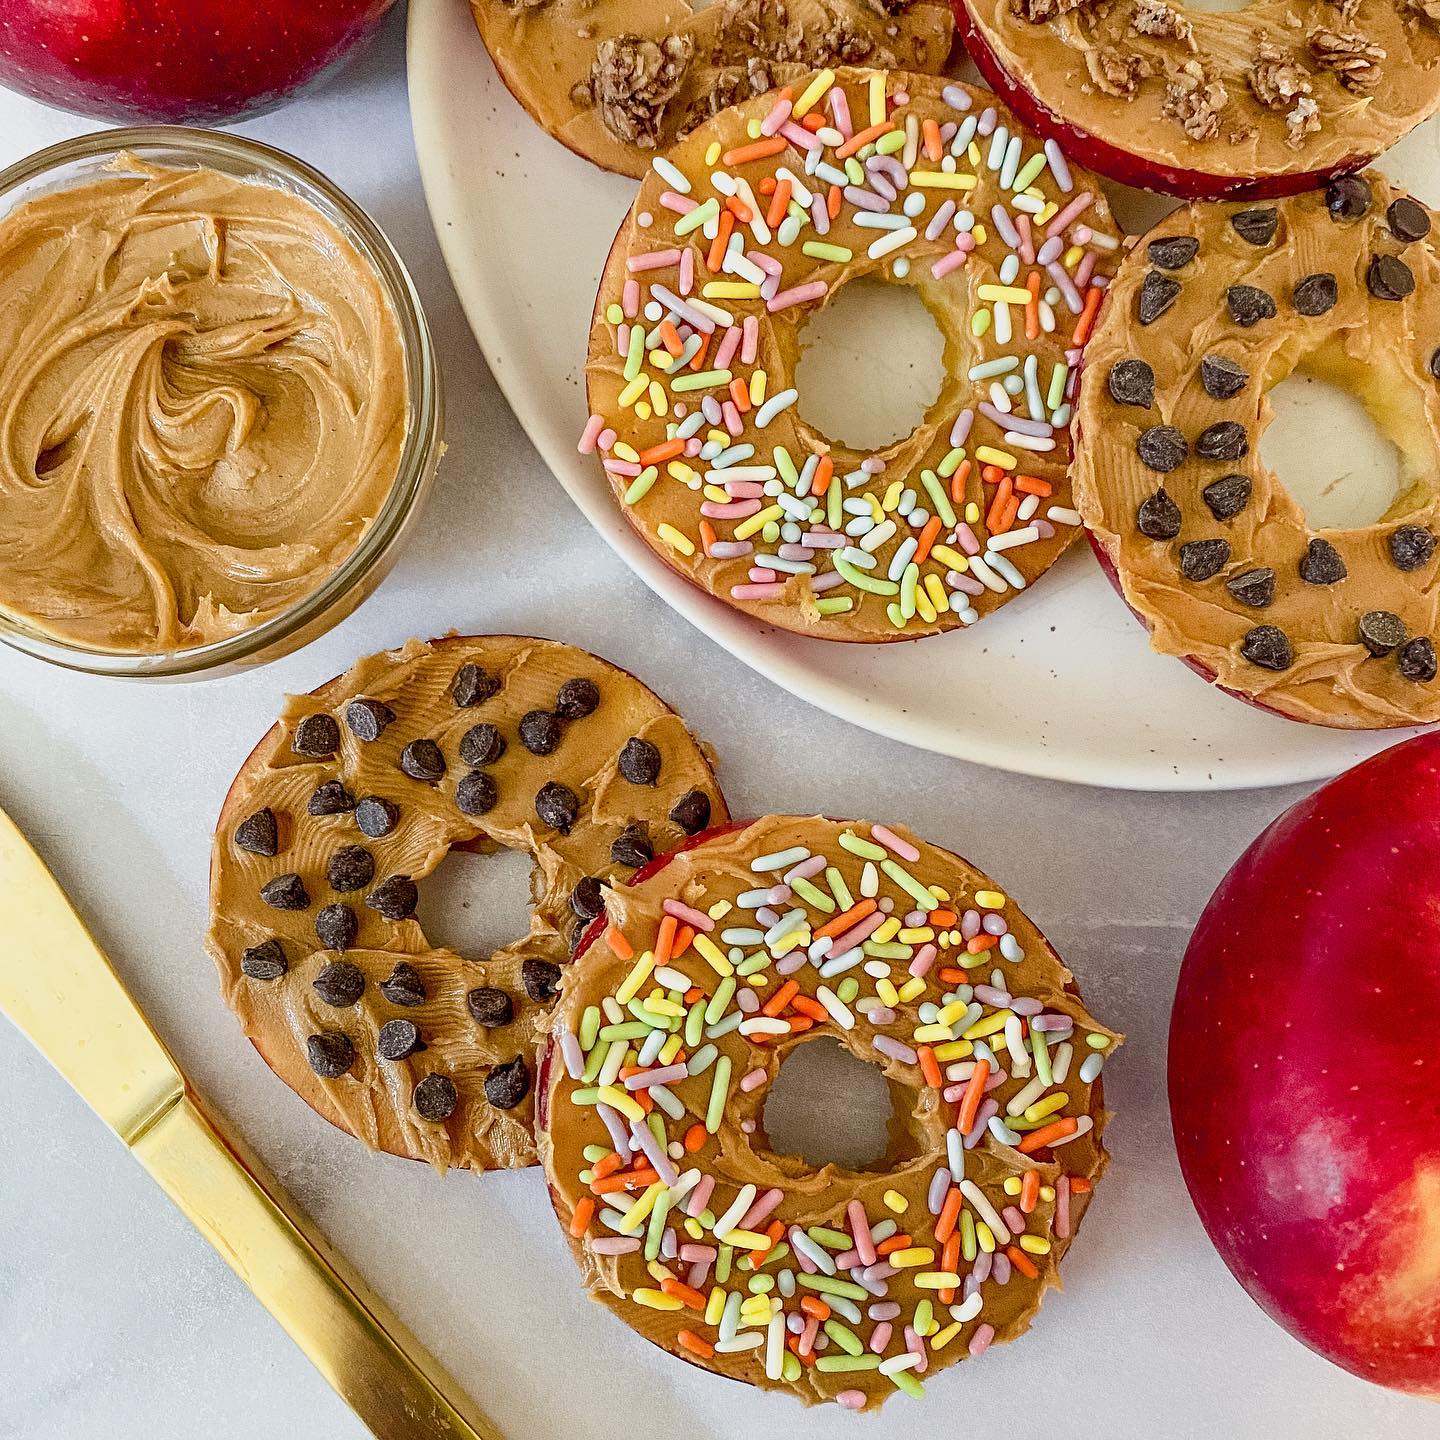 have you ever made little apple donuts?🍎🍩 i mean they aren’t a donut but they’re such a cute & fun snack👌🏻
.
the boys loved these! all i did was slice my Rubyfrost apples, took out the core, & topped them with: maple peanut butter, chocolate chips, sprinkles, & granola💯
.
to make the maple peanut butter: mix together: 1/4 cup natural peanut butter, 1-2 tbsp maple syrup (depending on sweetness preferred), 1/2 tsp cinnamon & pinch of sea salt🍁
.
great for both kids & adults! & i used my @rubyfrostapple that are perfectly sweet yet tart while being crisp & delish! they’re a vibrant red & a great apple for baking! they’re also slow to brown because they have high levels of vitamin C, so don’t forget that the next time you’re putting apples on a charcuterie board!💃🏼
.
if you’ve never tried them, you must! i’m such an apple lover, they’re one of my fav snacks and these are delish! you can follow @rubyfrostapple on instagram to see if they sell these fab apples near you🍎

#PrettyDelicious #RubyFrostApples #sponsored